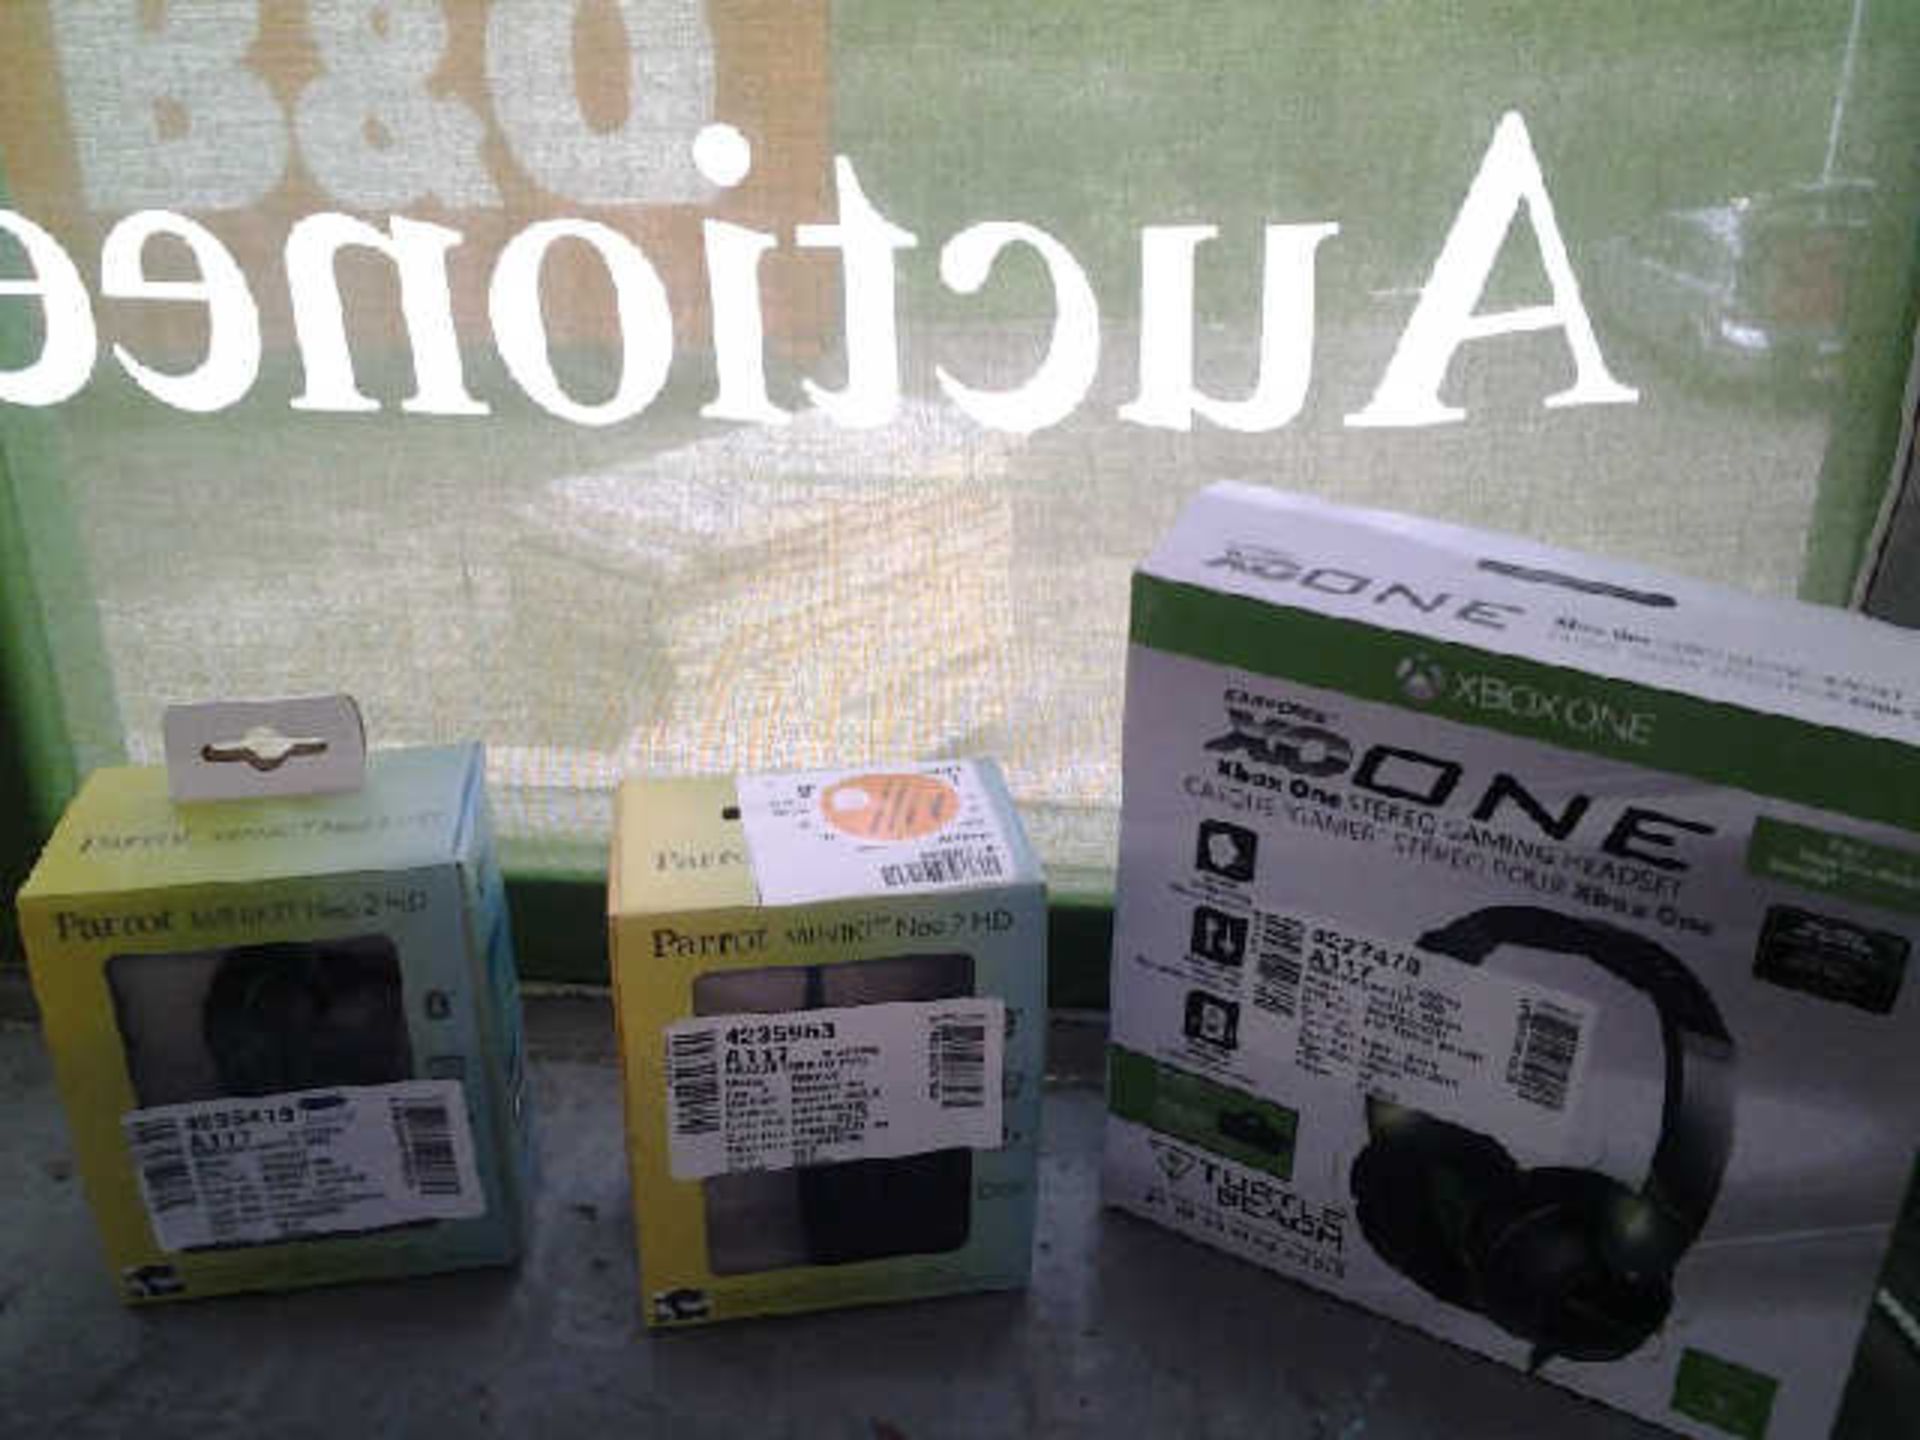 APPROX 3 ITEMS INCLUDING XBOX ONE TURTLEBEACH EARFORCE HEADPHONES AND 2 X PARROT MINIKIT NEO 2 HD... - Image 3 of 3